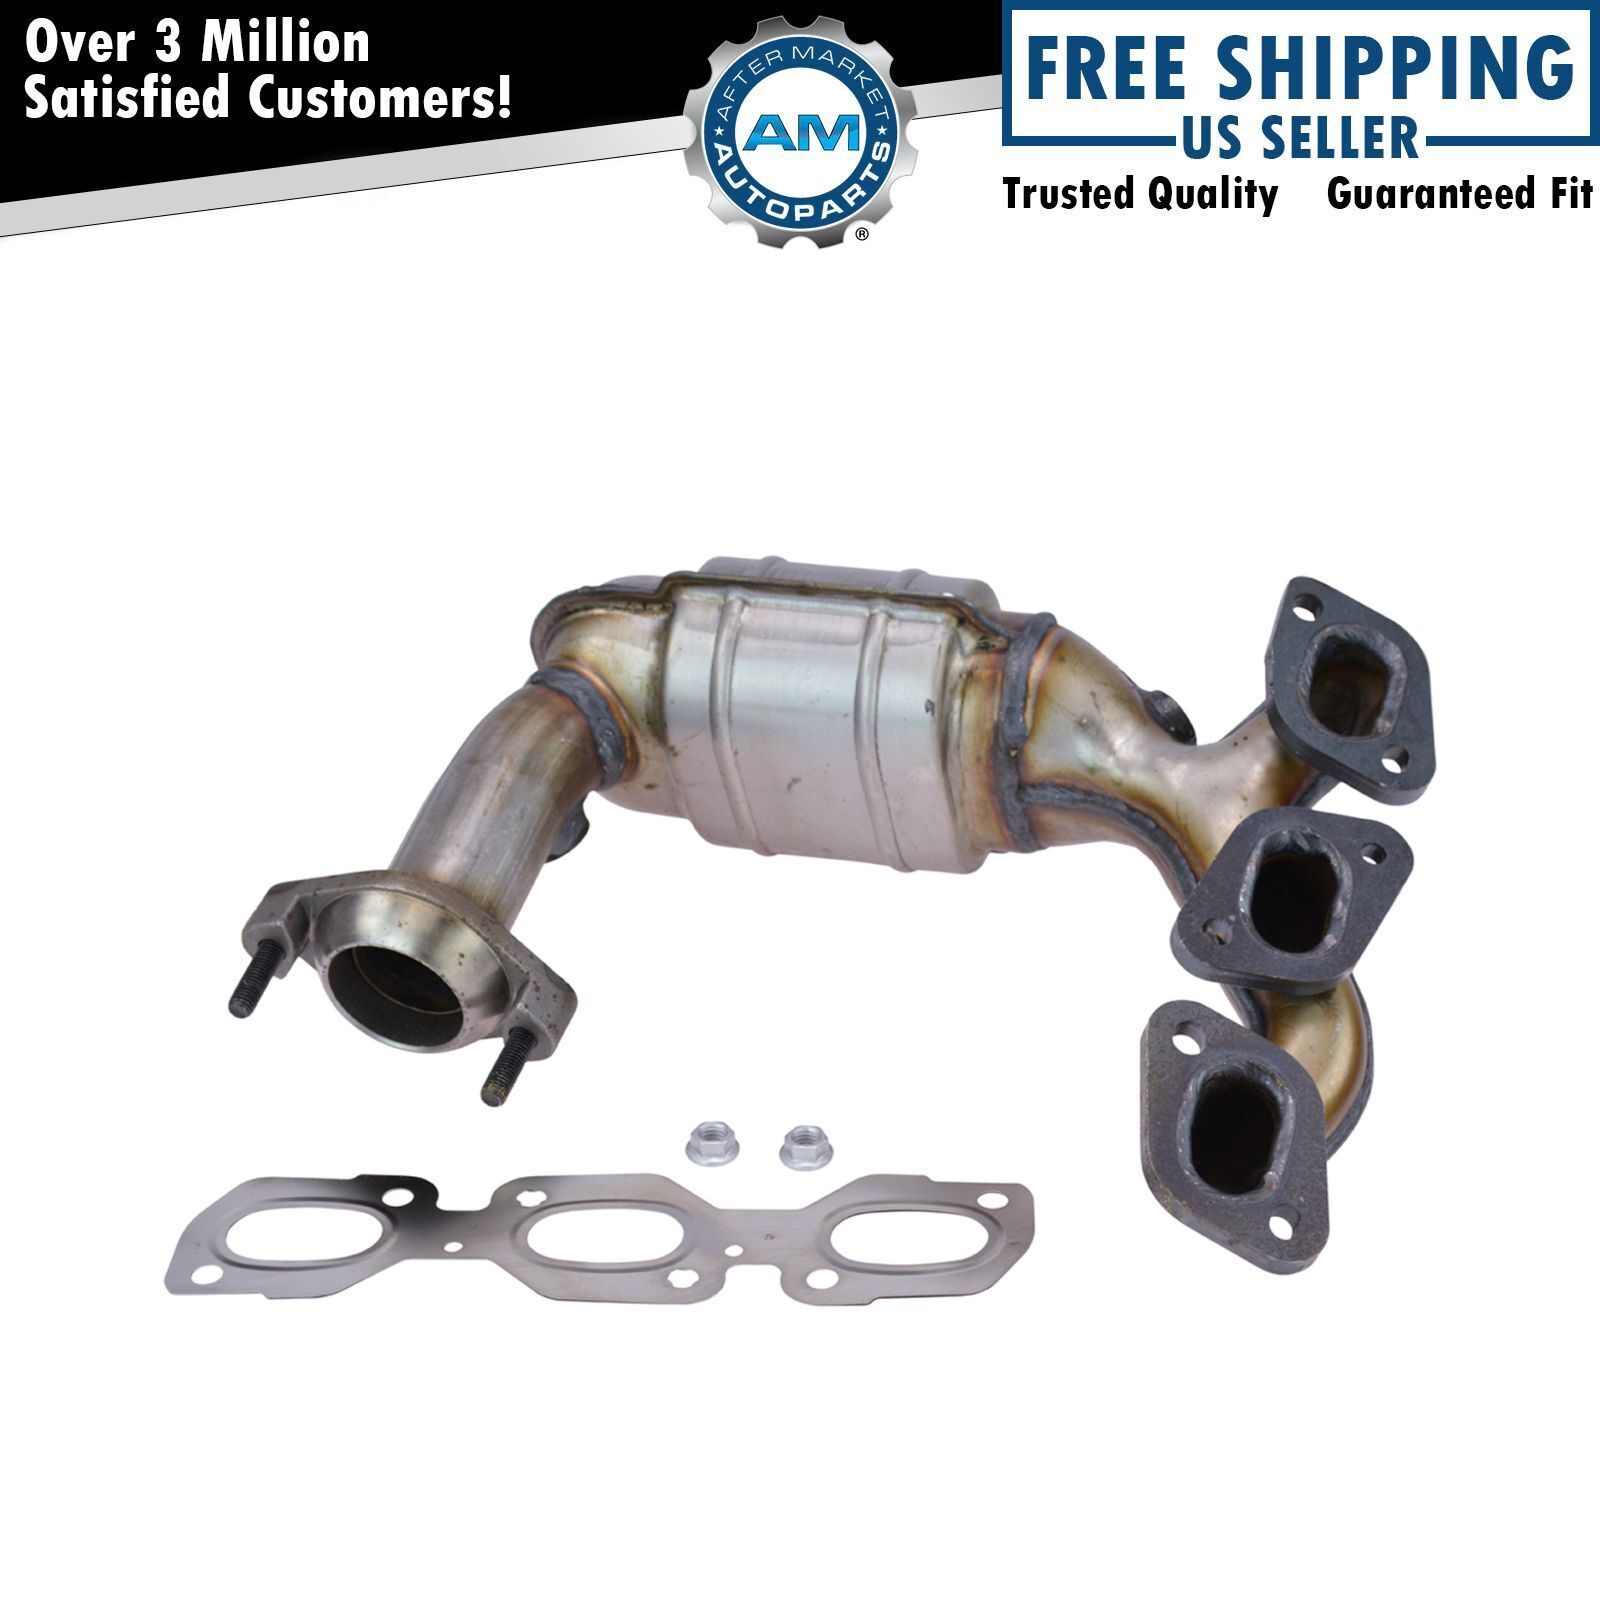 Exhaust Manifold w/ Catalytic Converter Front for Escape Tribute Mariner 3.0L V6